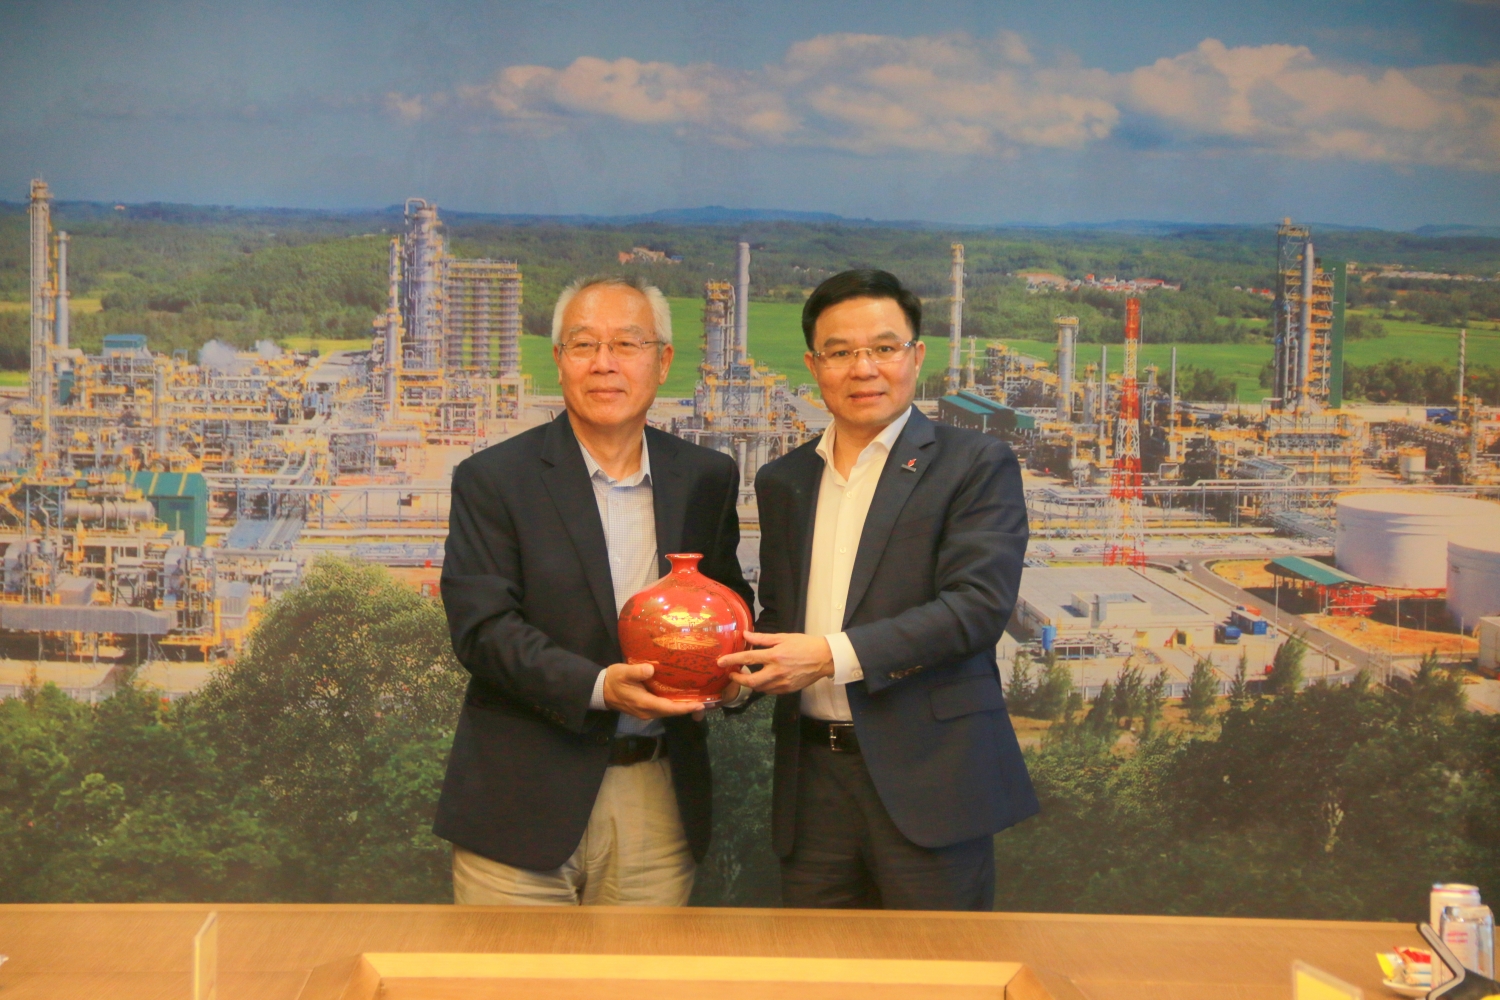 Petrovietnam and Massachusetts Institute of Technology share experiences on hydrogen value chain and energy transition